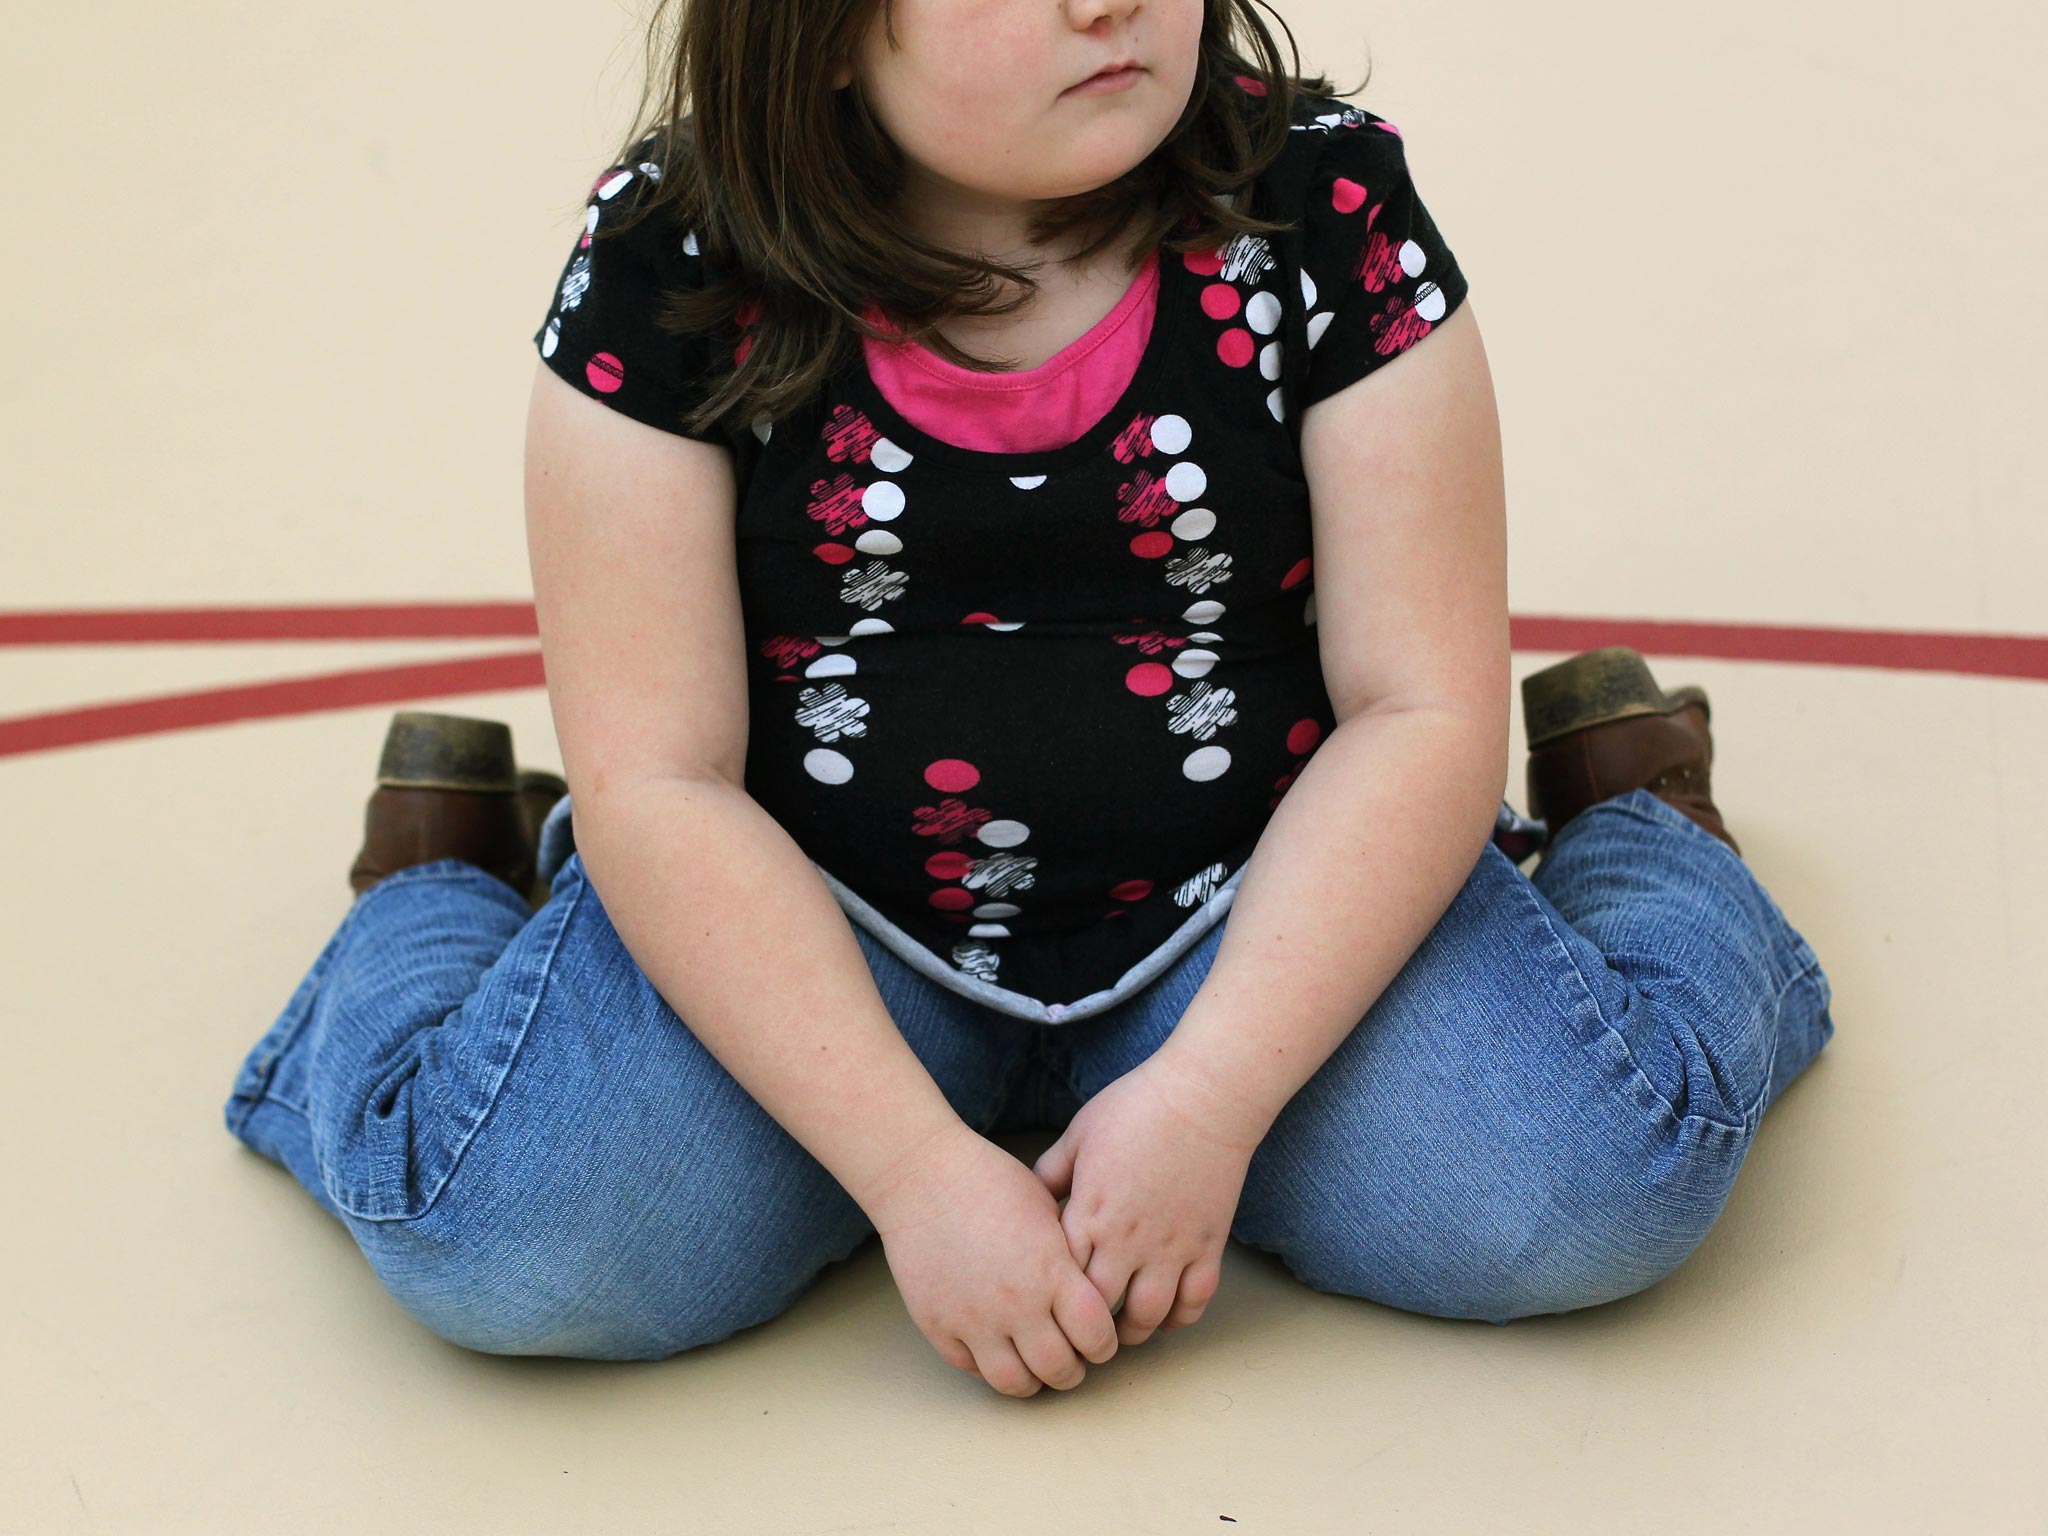 Over the last three years, 183 children aged under 12 were found to weigh more than 16 stone